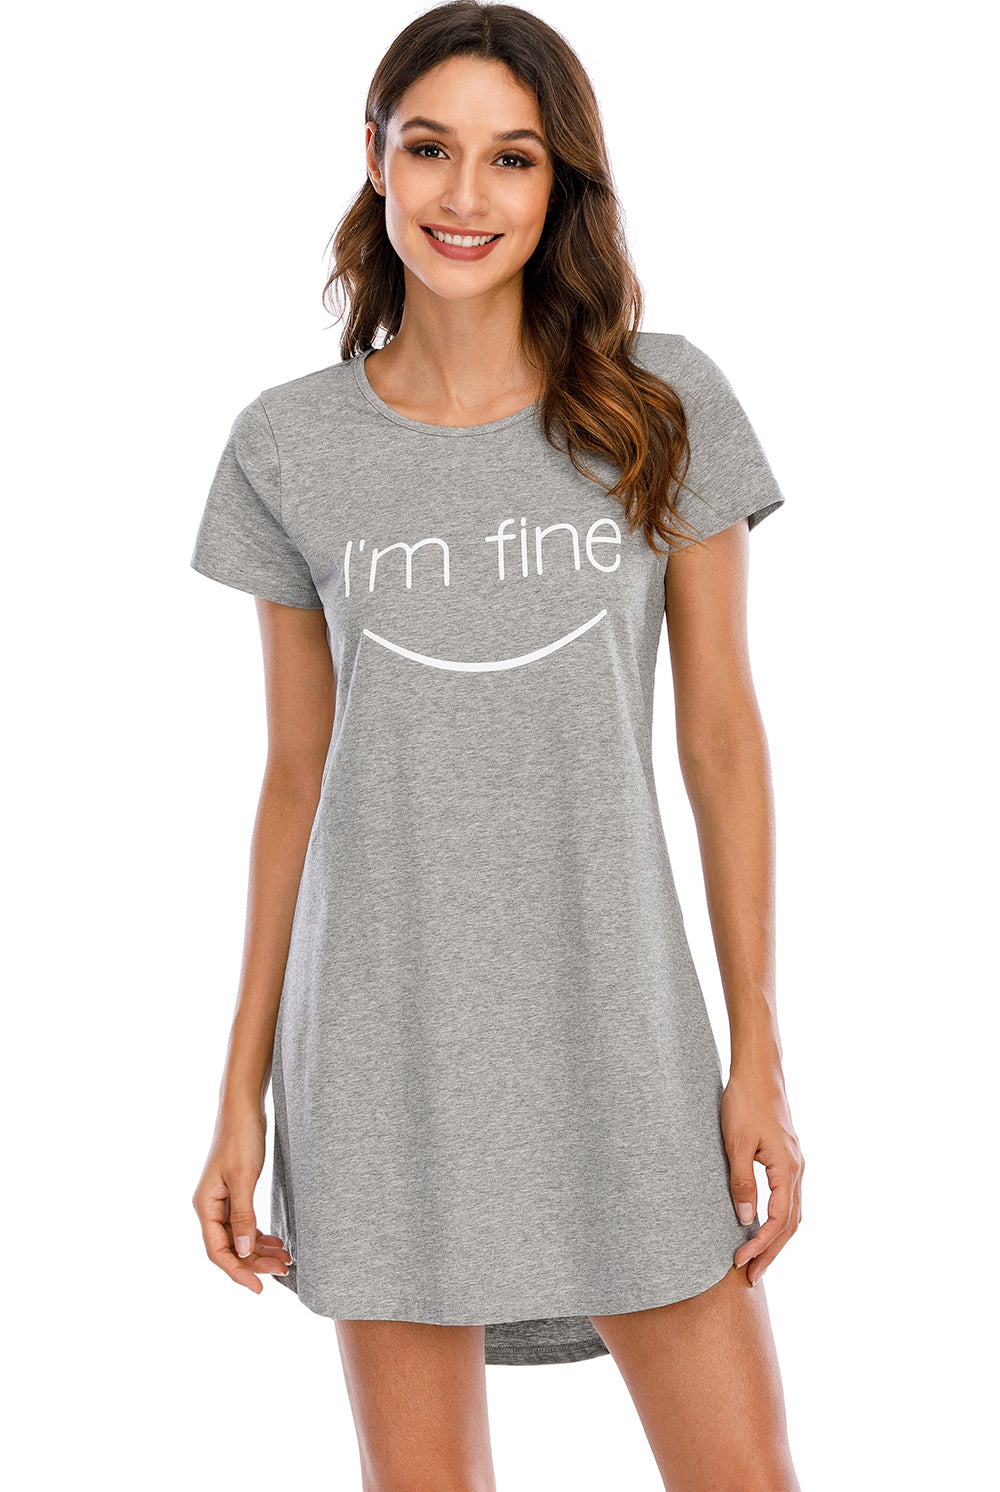 A woman smiles softly, wearing a comfortable heather grey lounge dress with a playful "I'm fine" print accompanied by a smiley face on the front. The dress has a relaxed fit, round neckline, and short sleeves, perfect for a casual, laid-back look.